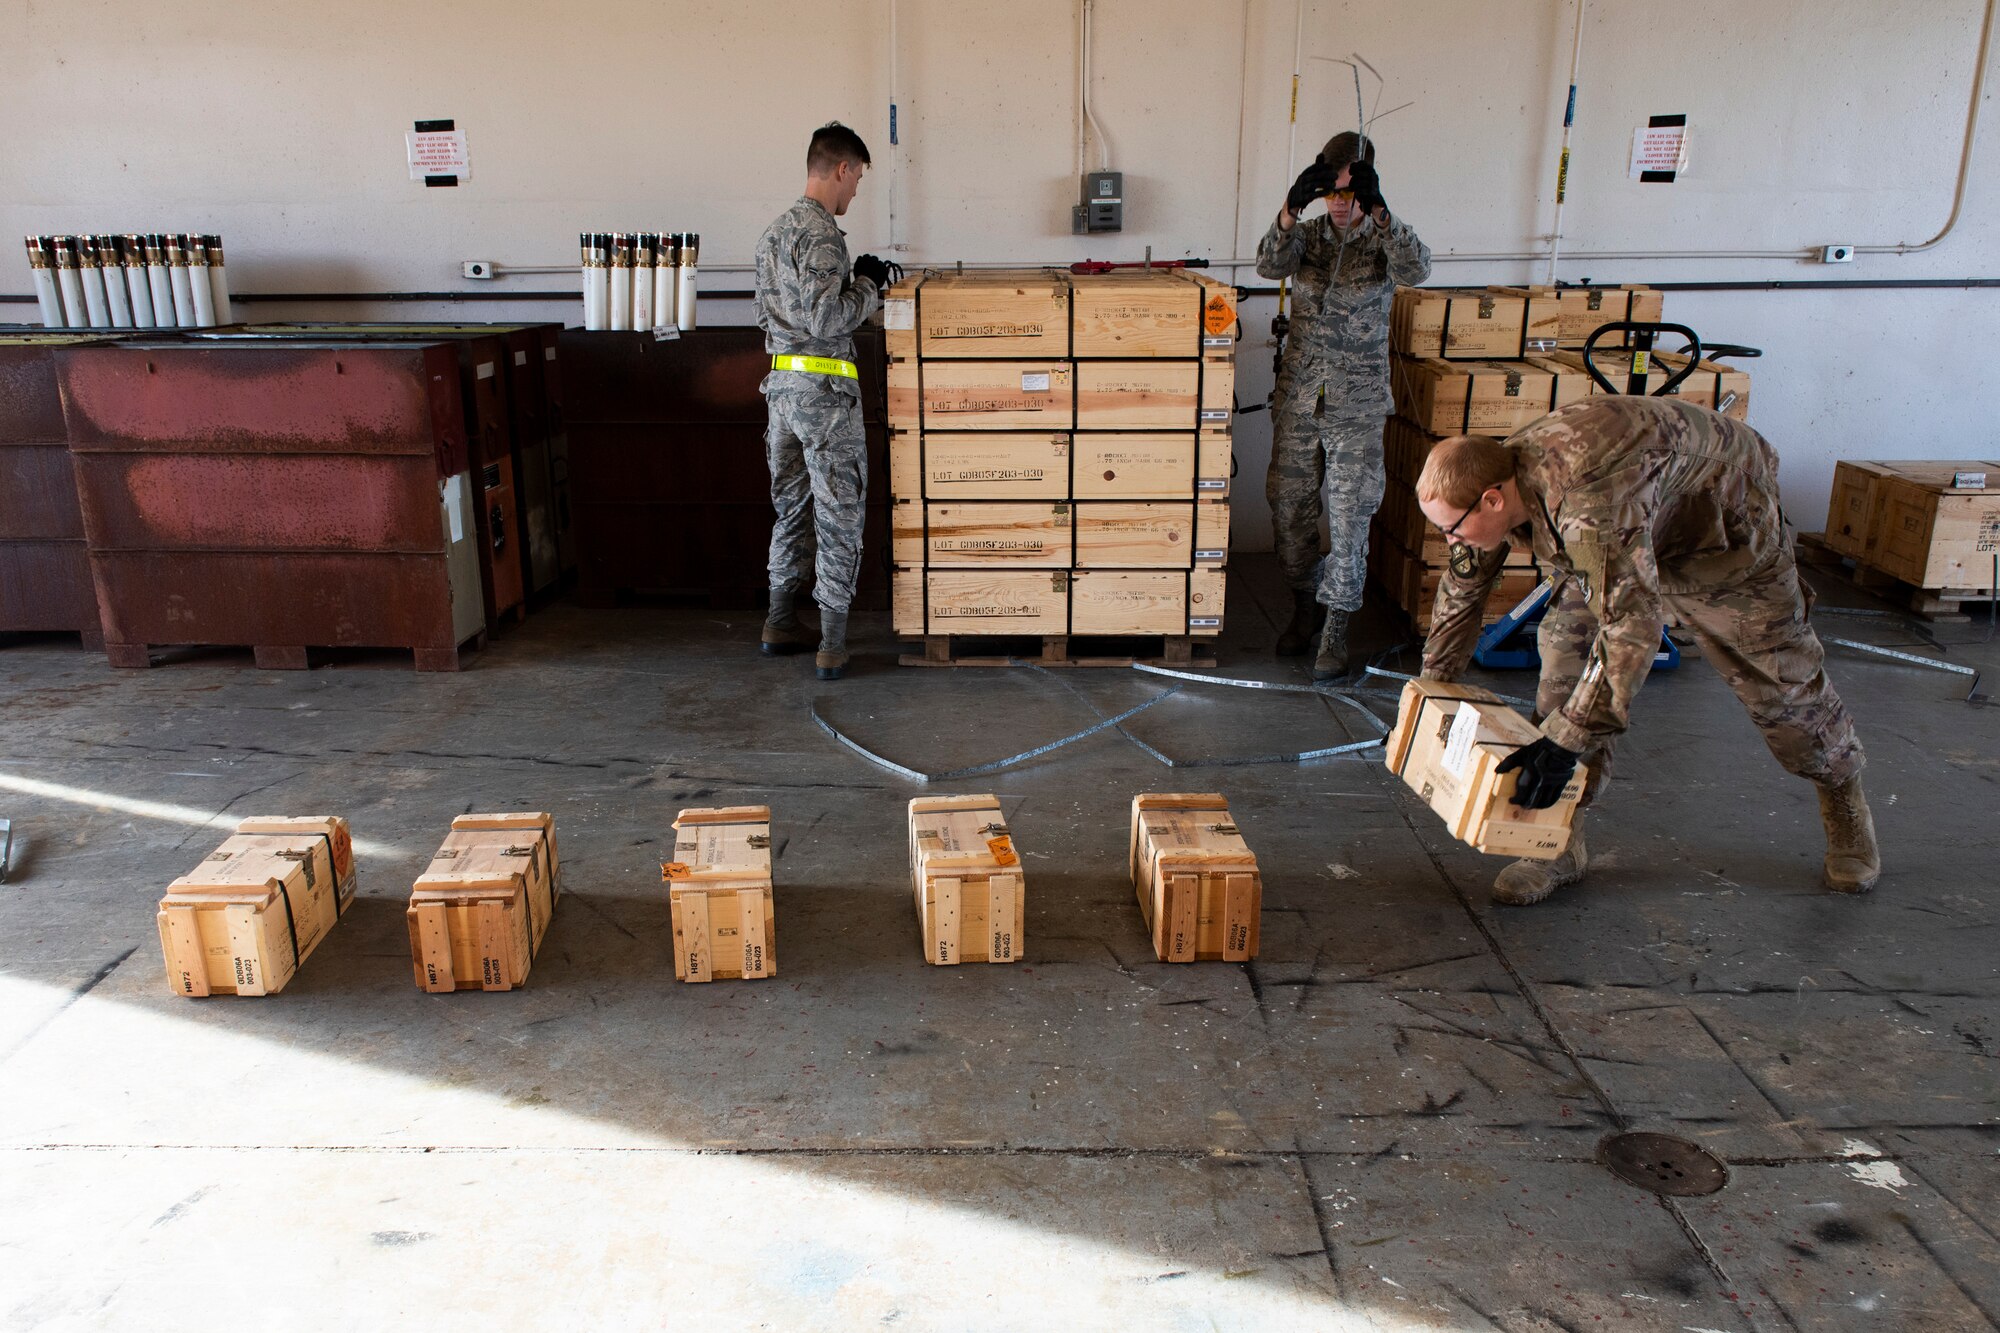 Airmen assigned to the 23d Maintenance Squadron prepare munitions for assembly Oct. 17, 2019, at Moody Air Force Base, Ga. The Munitions Flight Production Division is responsible for maintaining, inspecting, producing and delivering ammo to Moody’s munitions holding area. Following technical orders for operations and procedures allow the Airmen to minimize errors in their stock of over 52 million munitions, ensuring the fighter squadrons are prepared for future operations. (U.S. Air Force photo by Airman Elijah M. Dority)